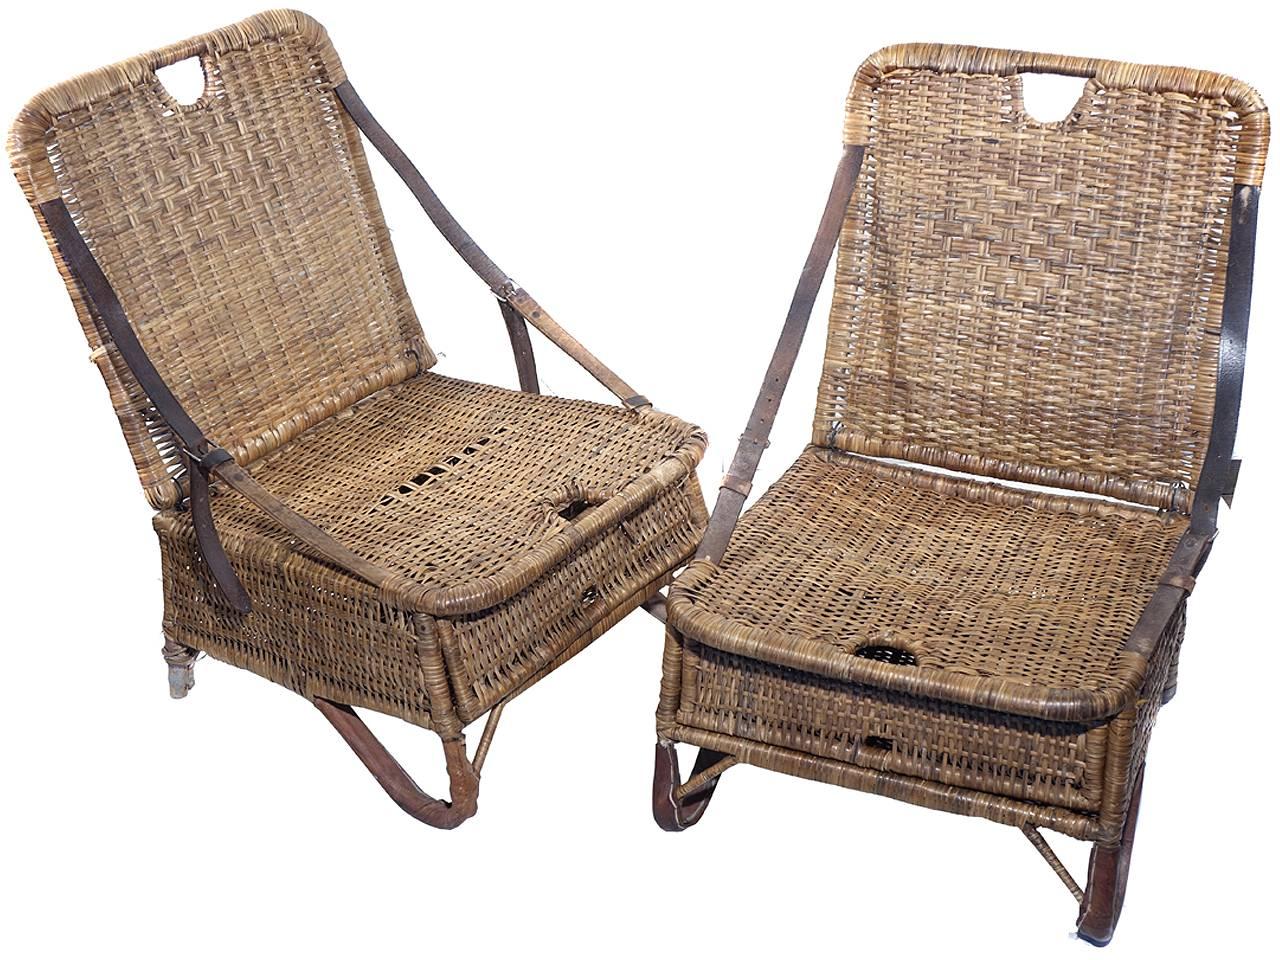 This is an early matching pair of canoe seats. The original owners used there for the beach and picnics. I'm guessing they are 1920s from the style and leather straps. Each fold up like a carrying case. The front has a door that opens for storage.